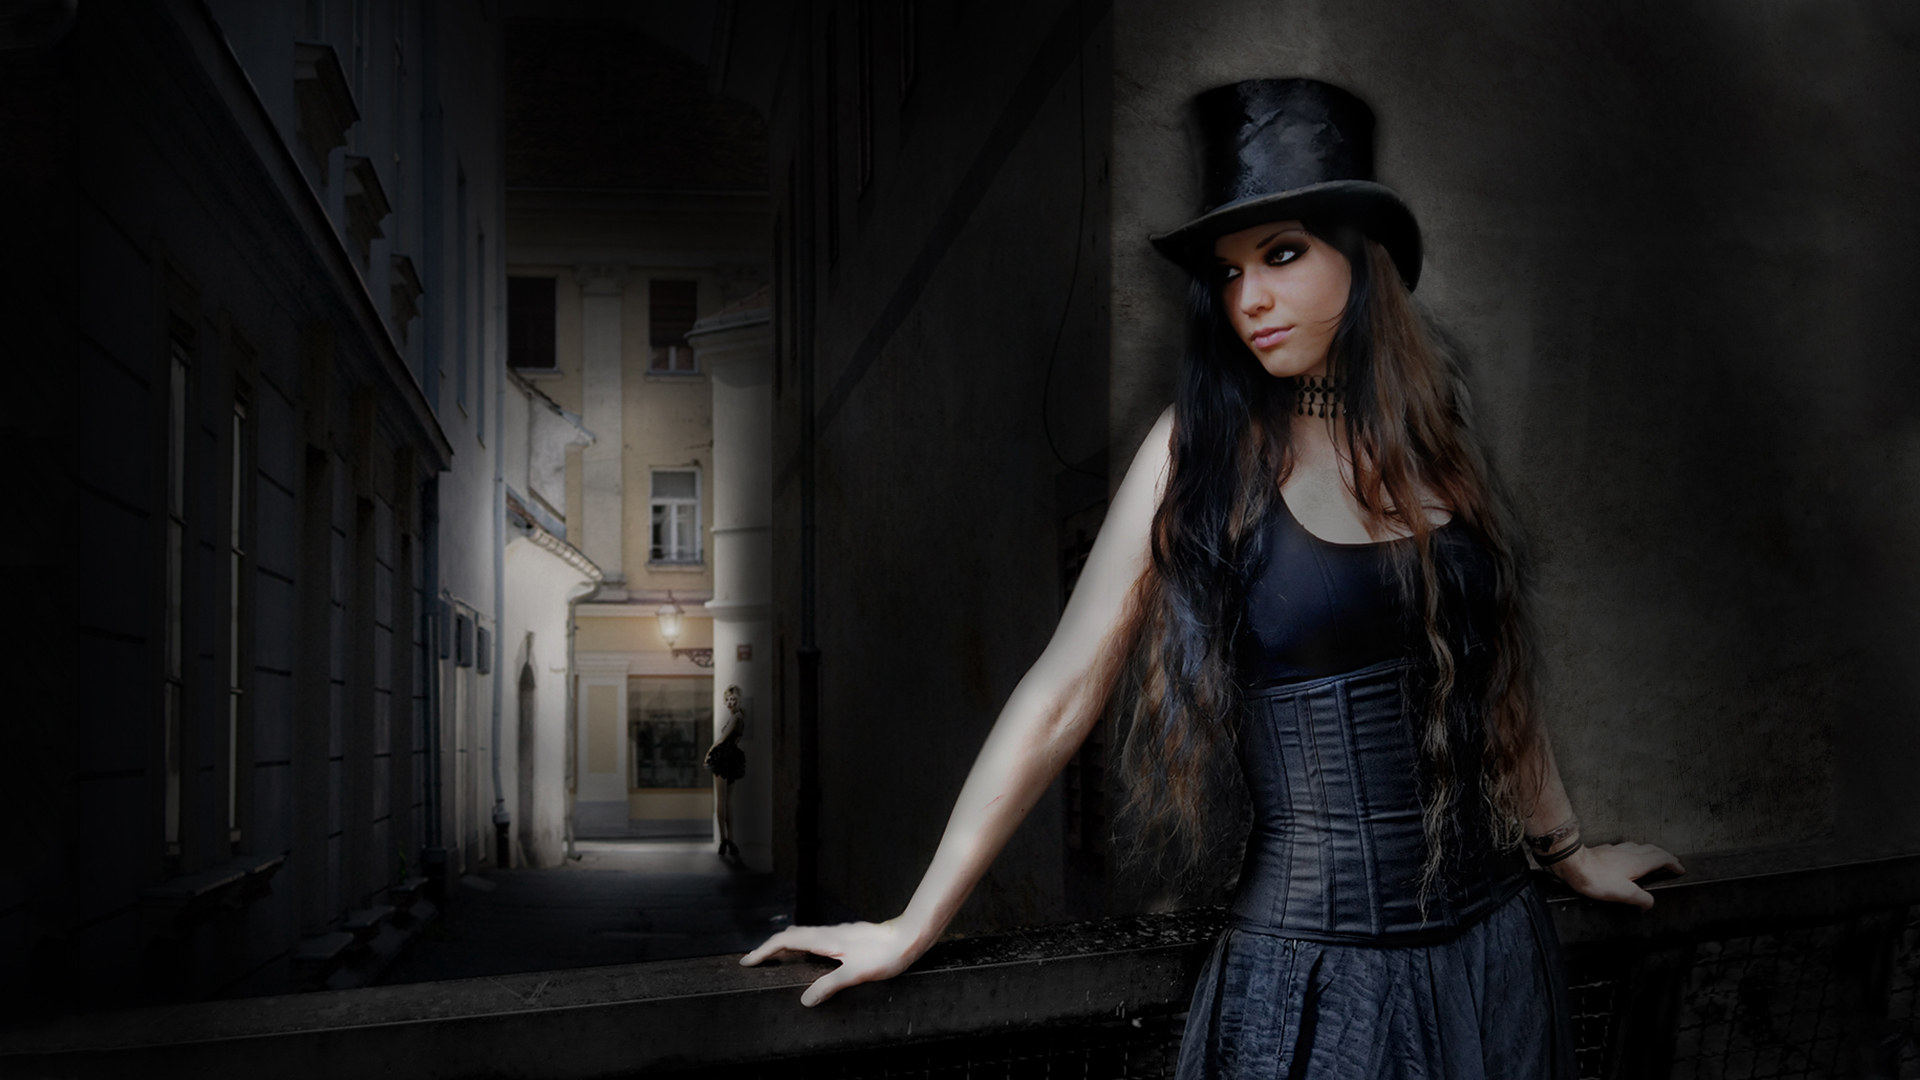 women, artistic, alley, gothic, street, top hat phone background